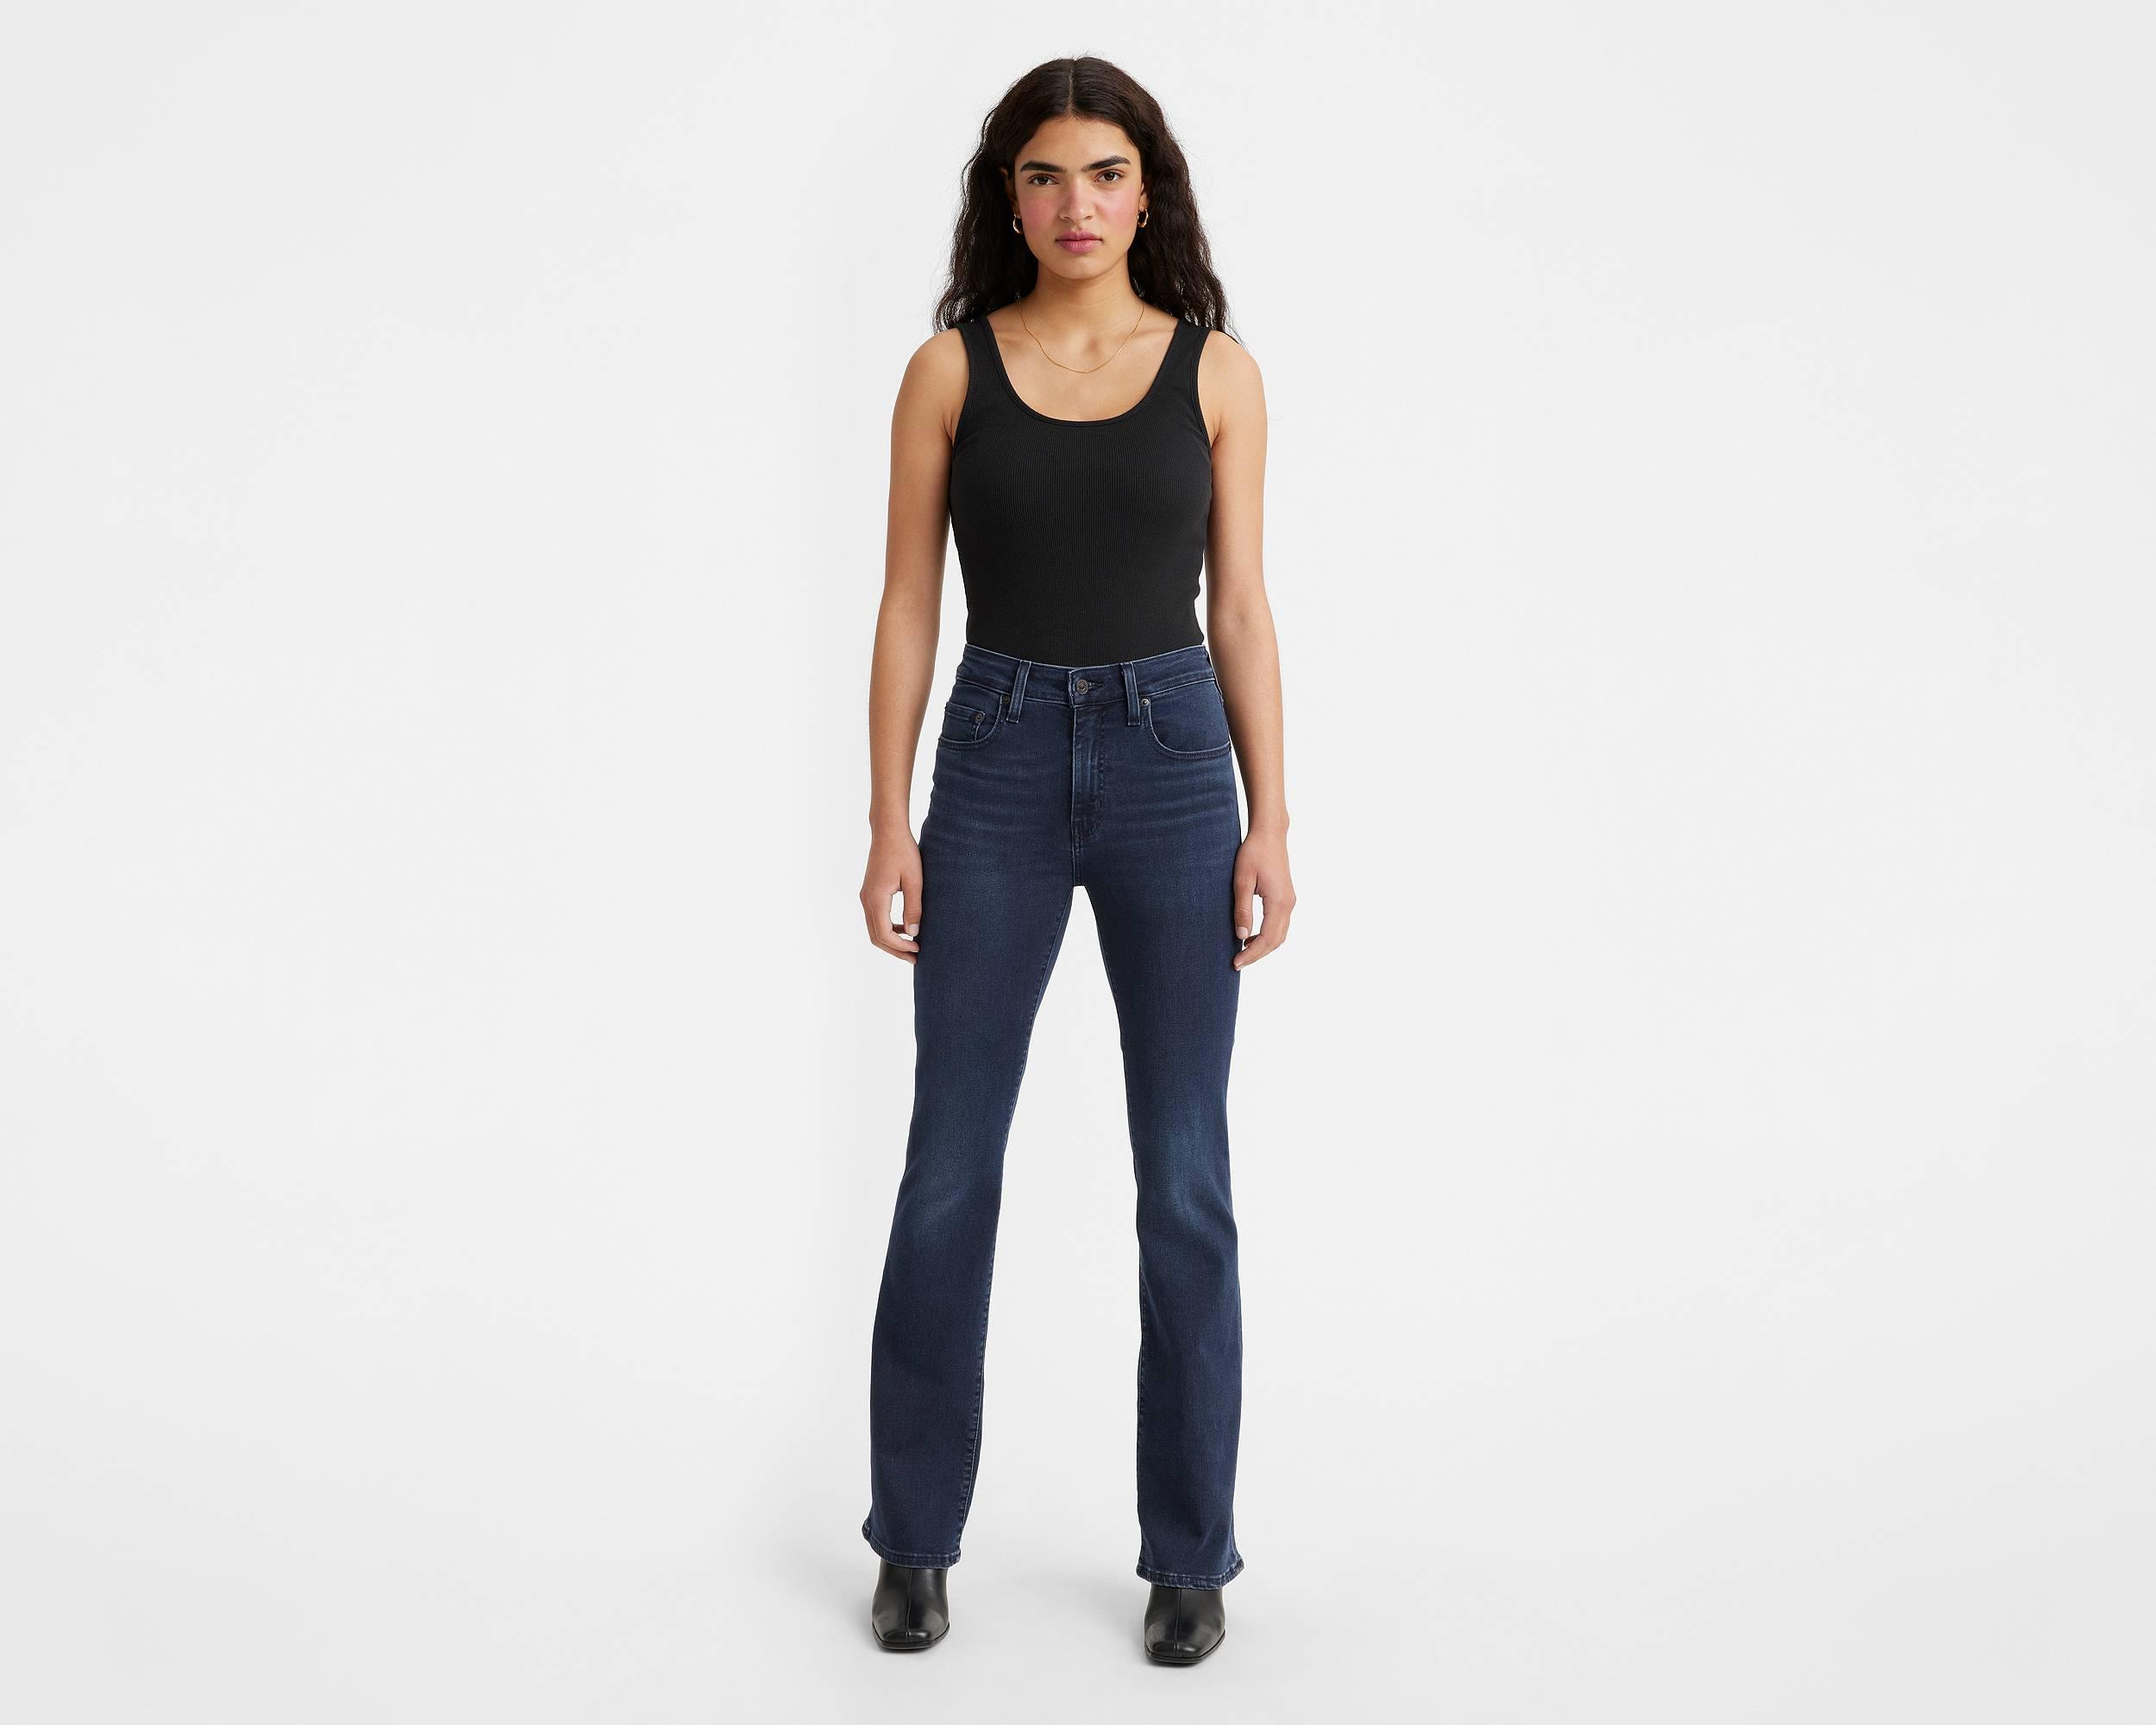 725™ High Rise Bootcut Jeans - Levi's Jeans, Jackets & Clothing